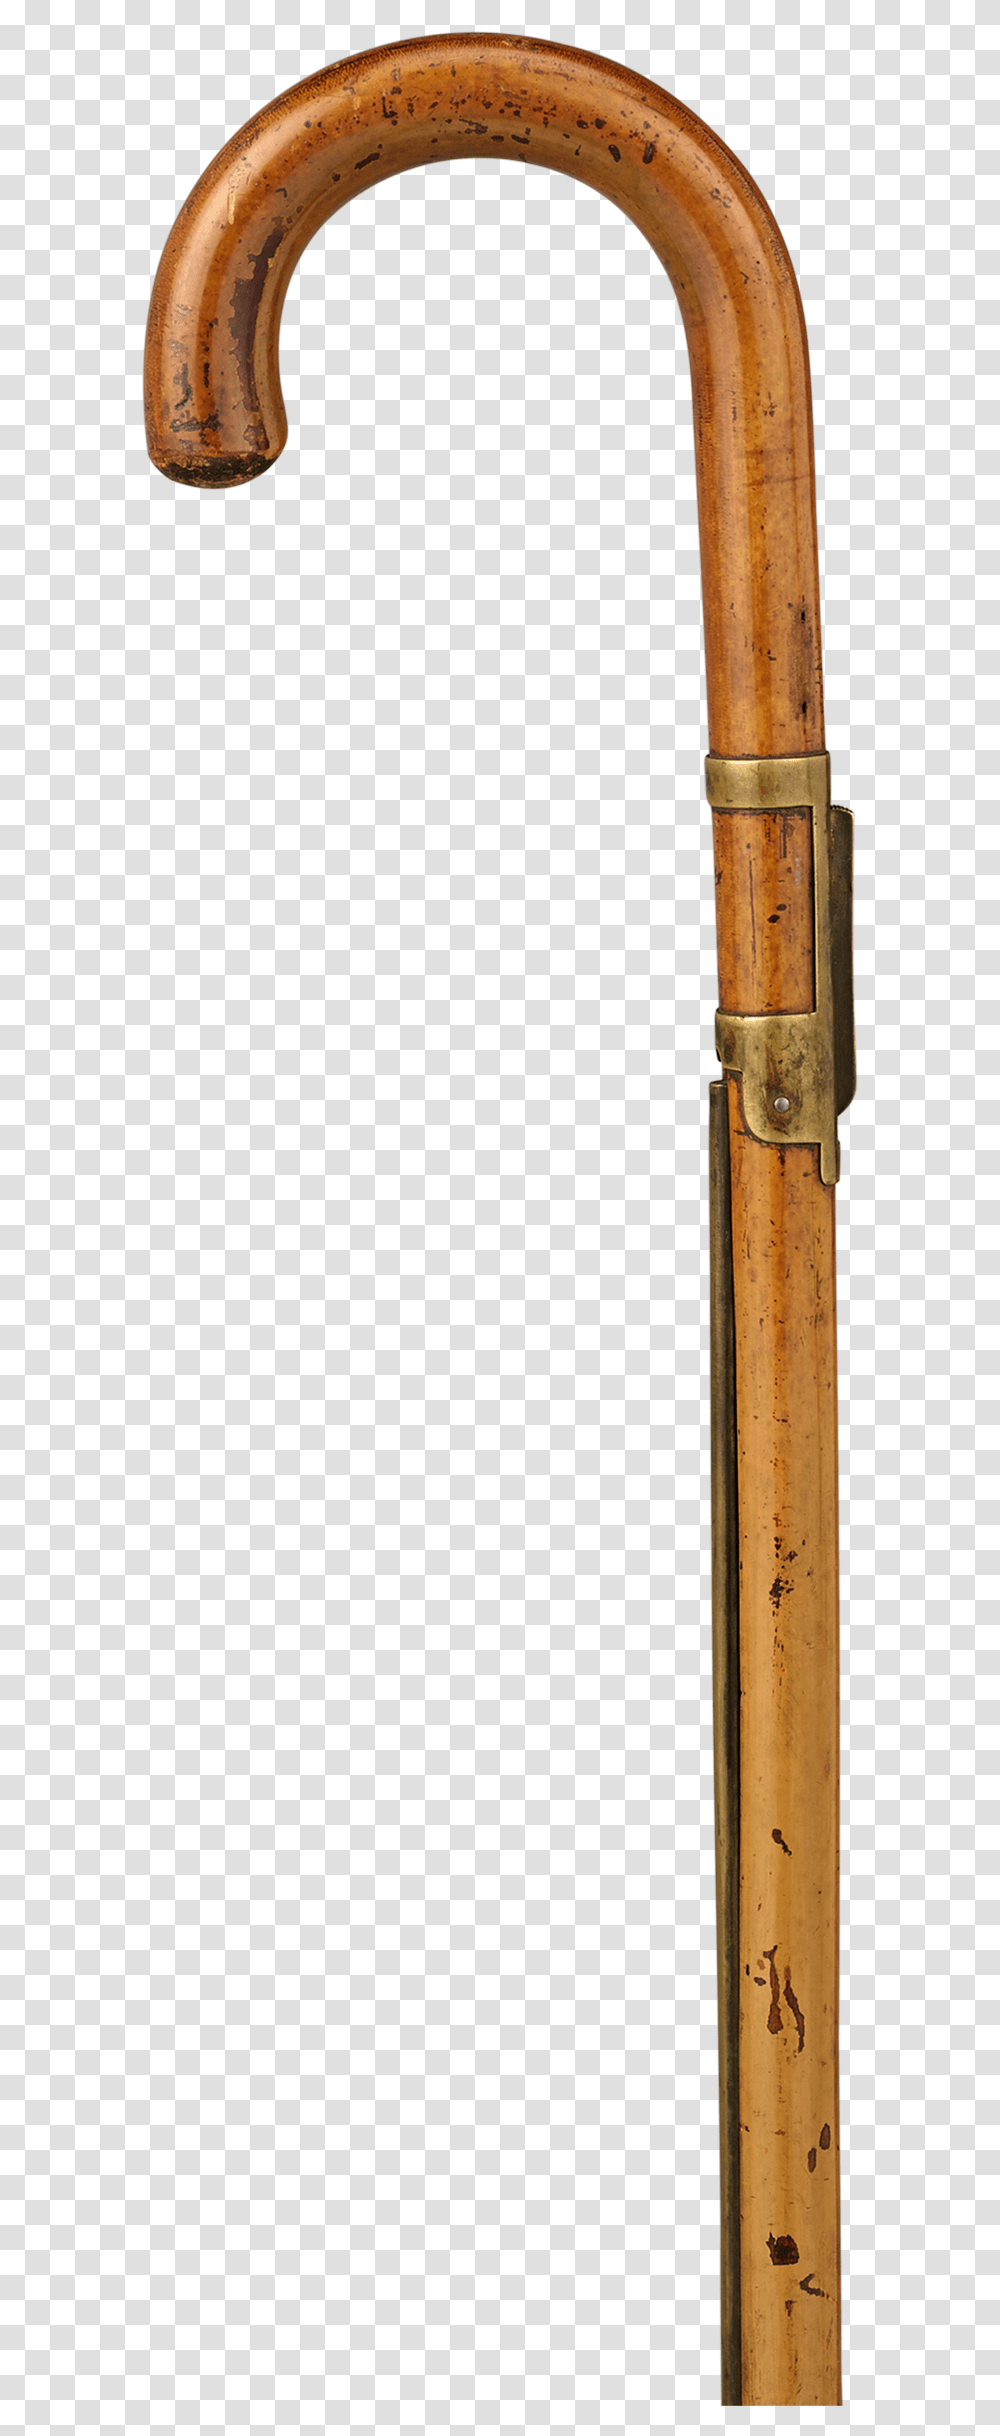 Sundial Walking Stick Rifle, Hammer, Tool, Weapon, Weaponry Transparent Png